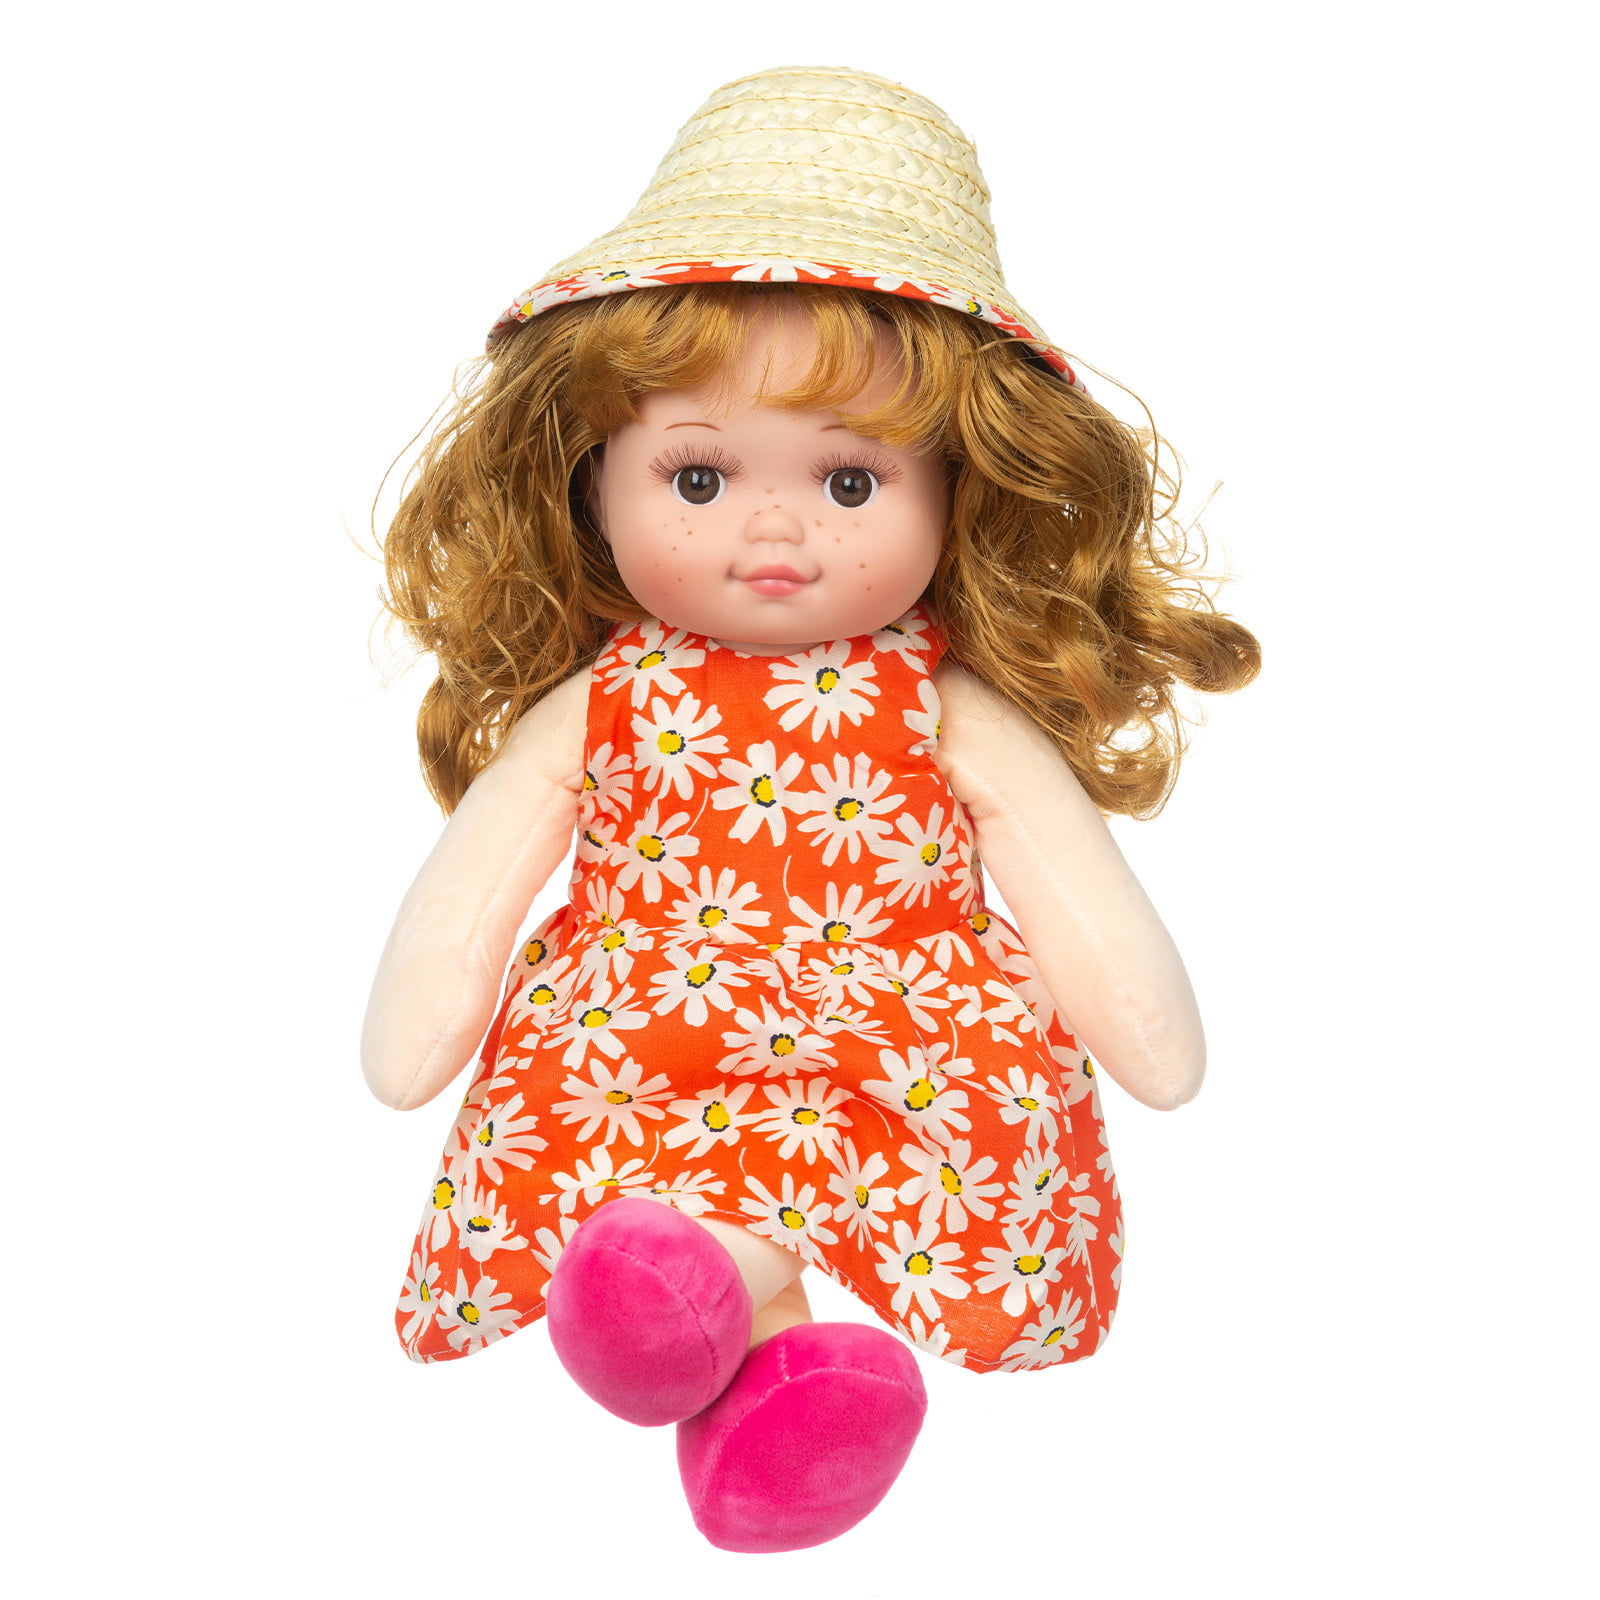 JELEUON 3 pcs Set Christmas Clothes Dress with Hats Scarfs for Outfits for 16-18 inch American Girl Doll Accessory Toy Gift